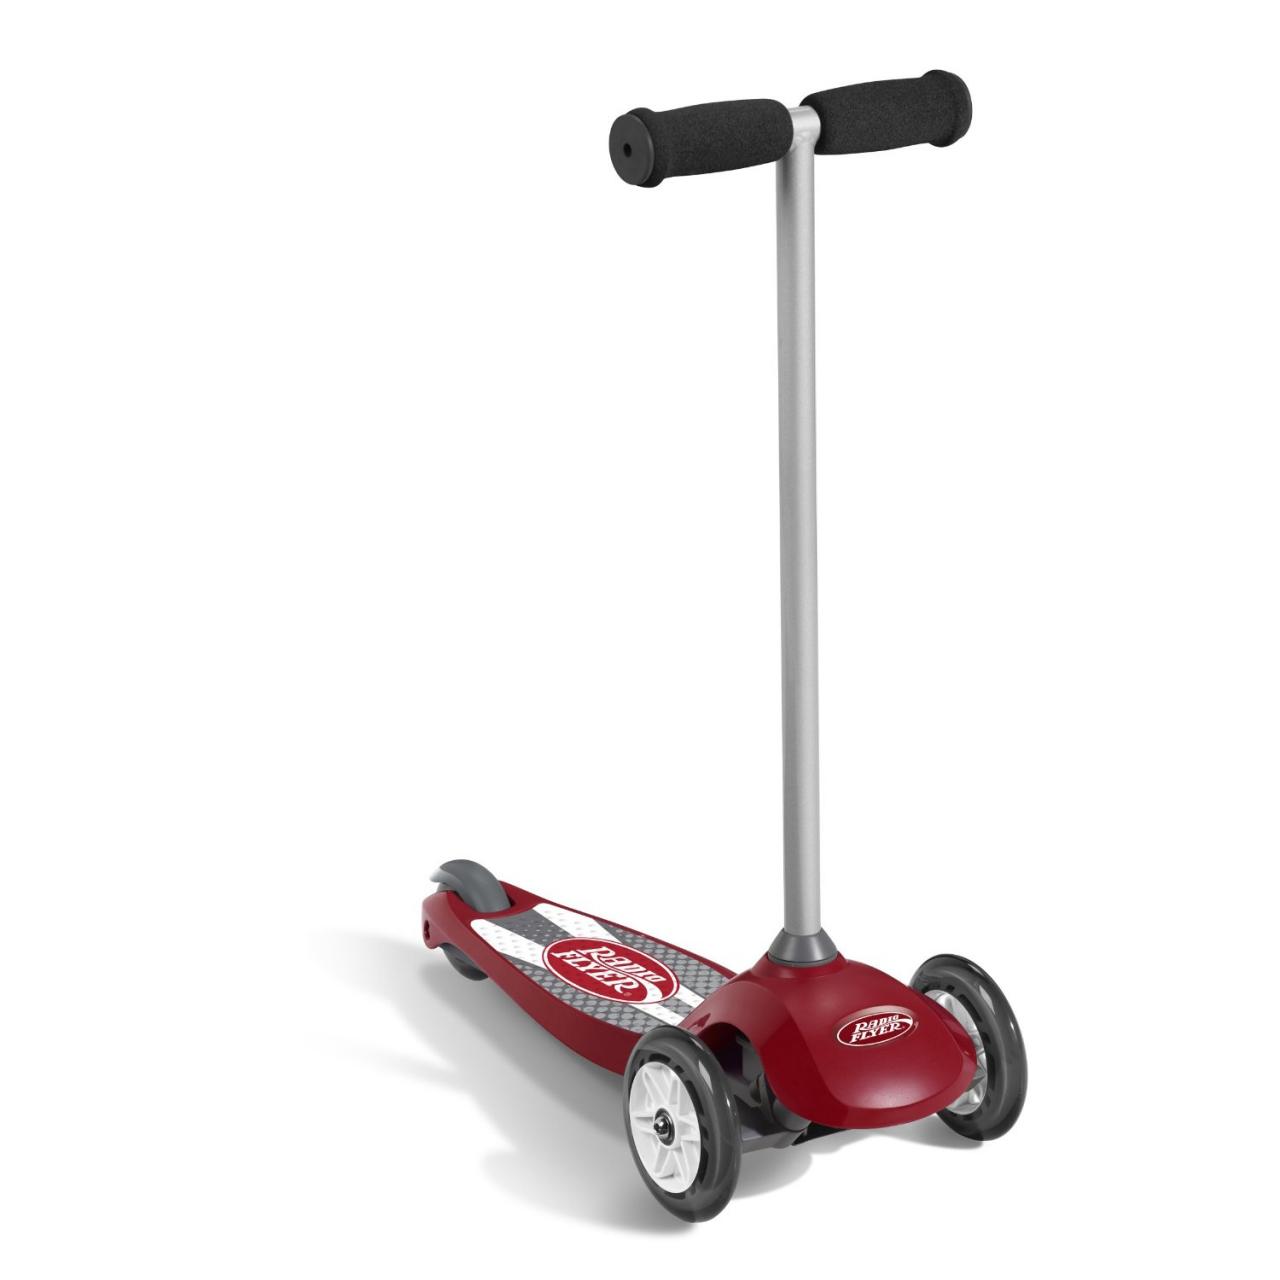 Top 10 Best Kids Scooters - Safe, Fun, Reliable!